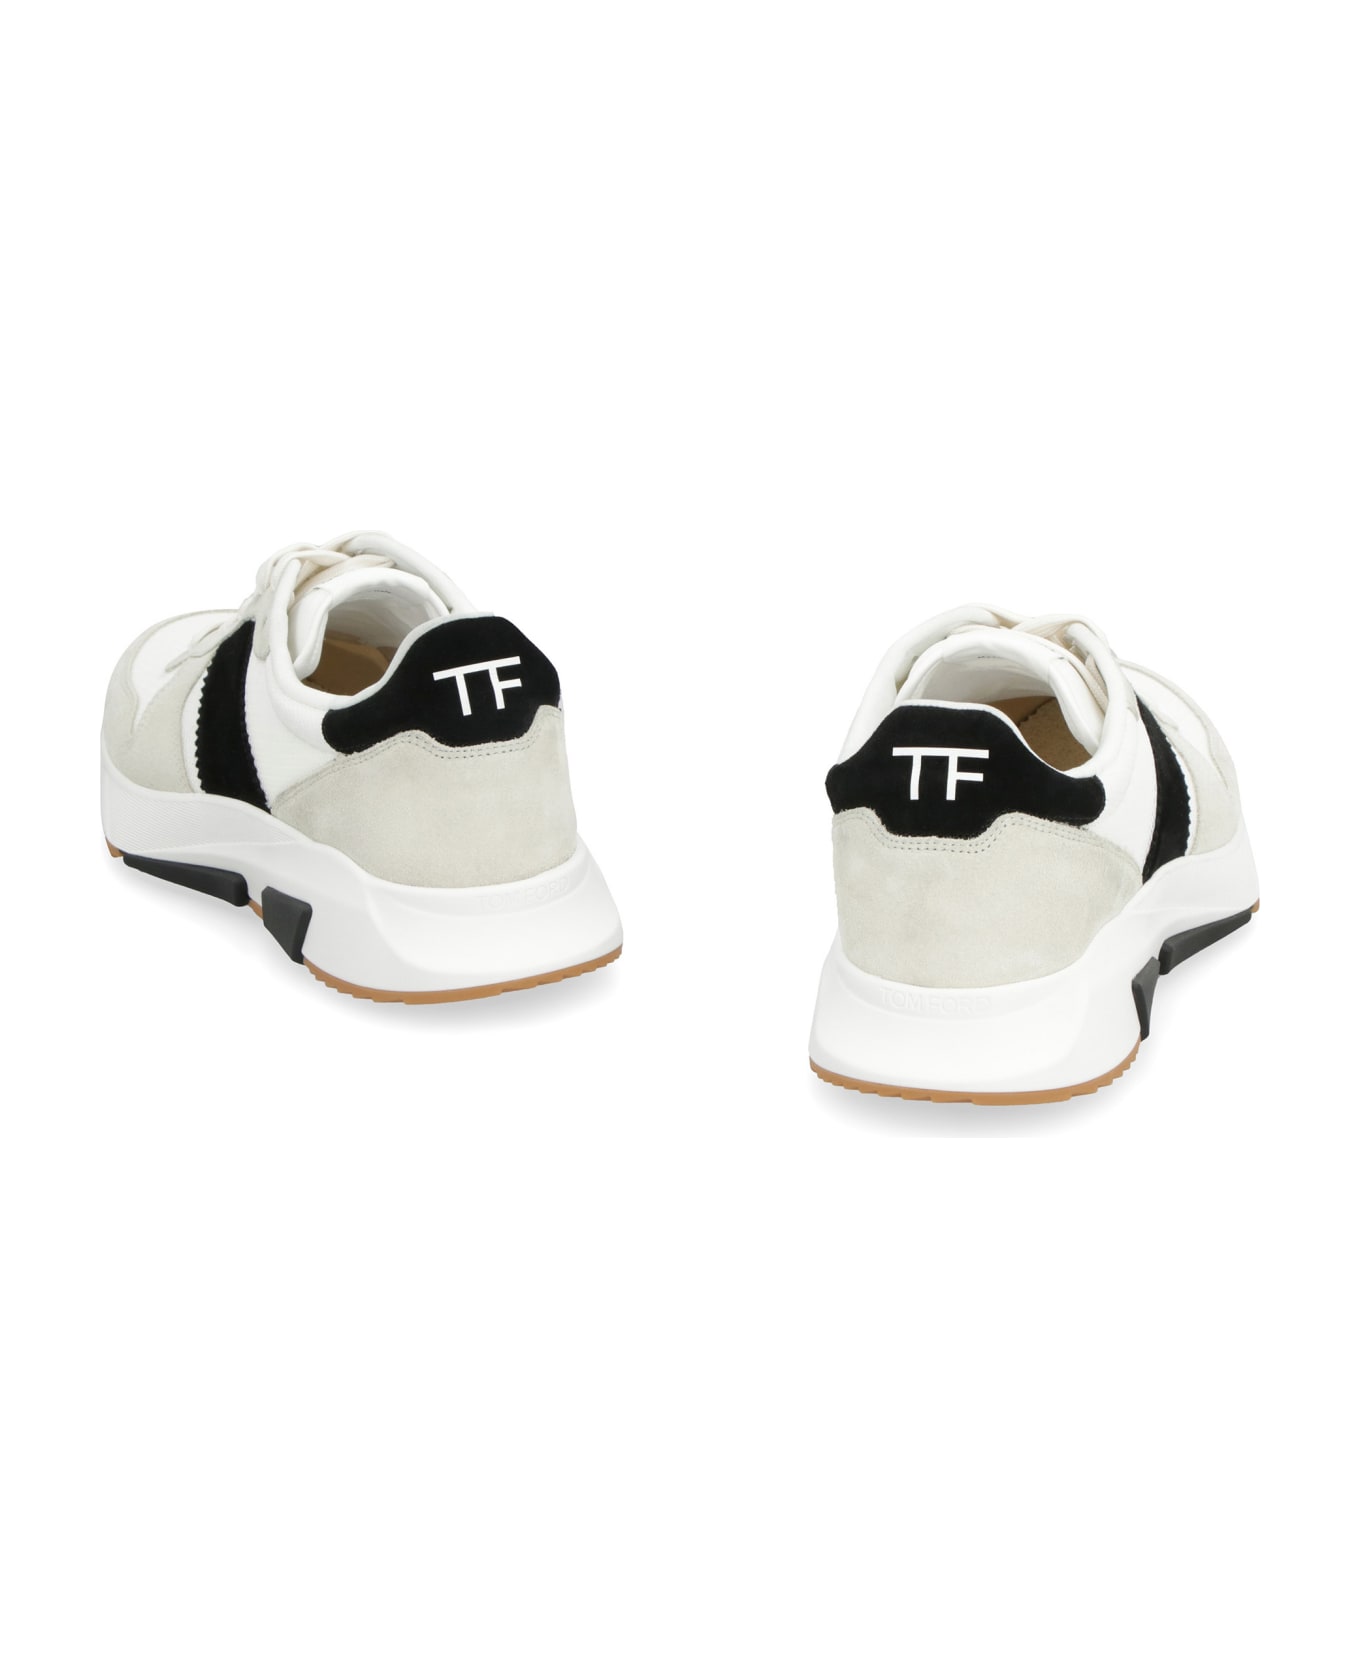 Tom Ford Leather And Fabric Low-top Sneakers - White